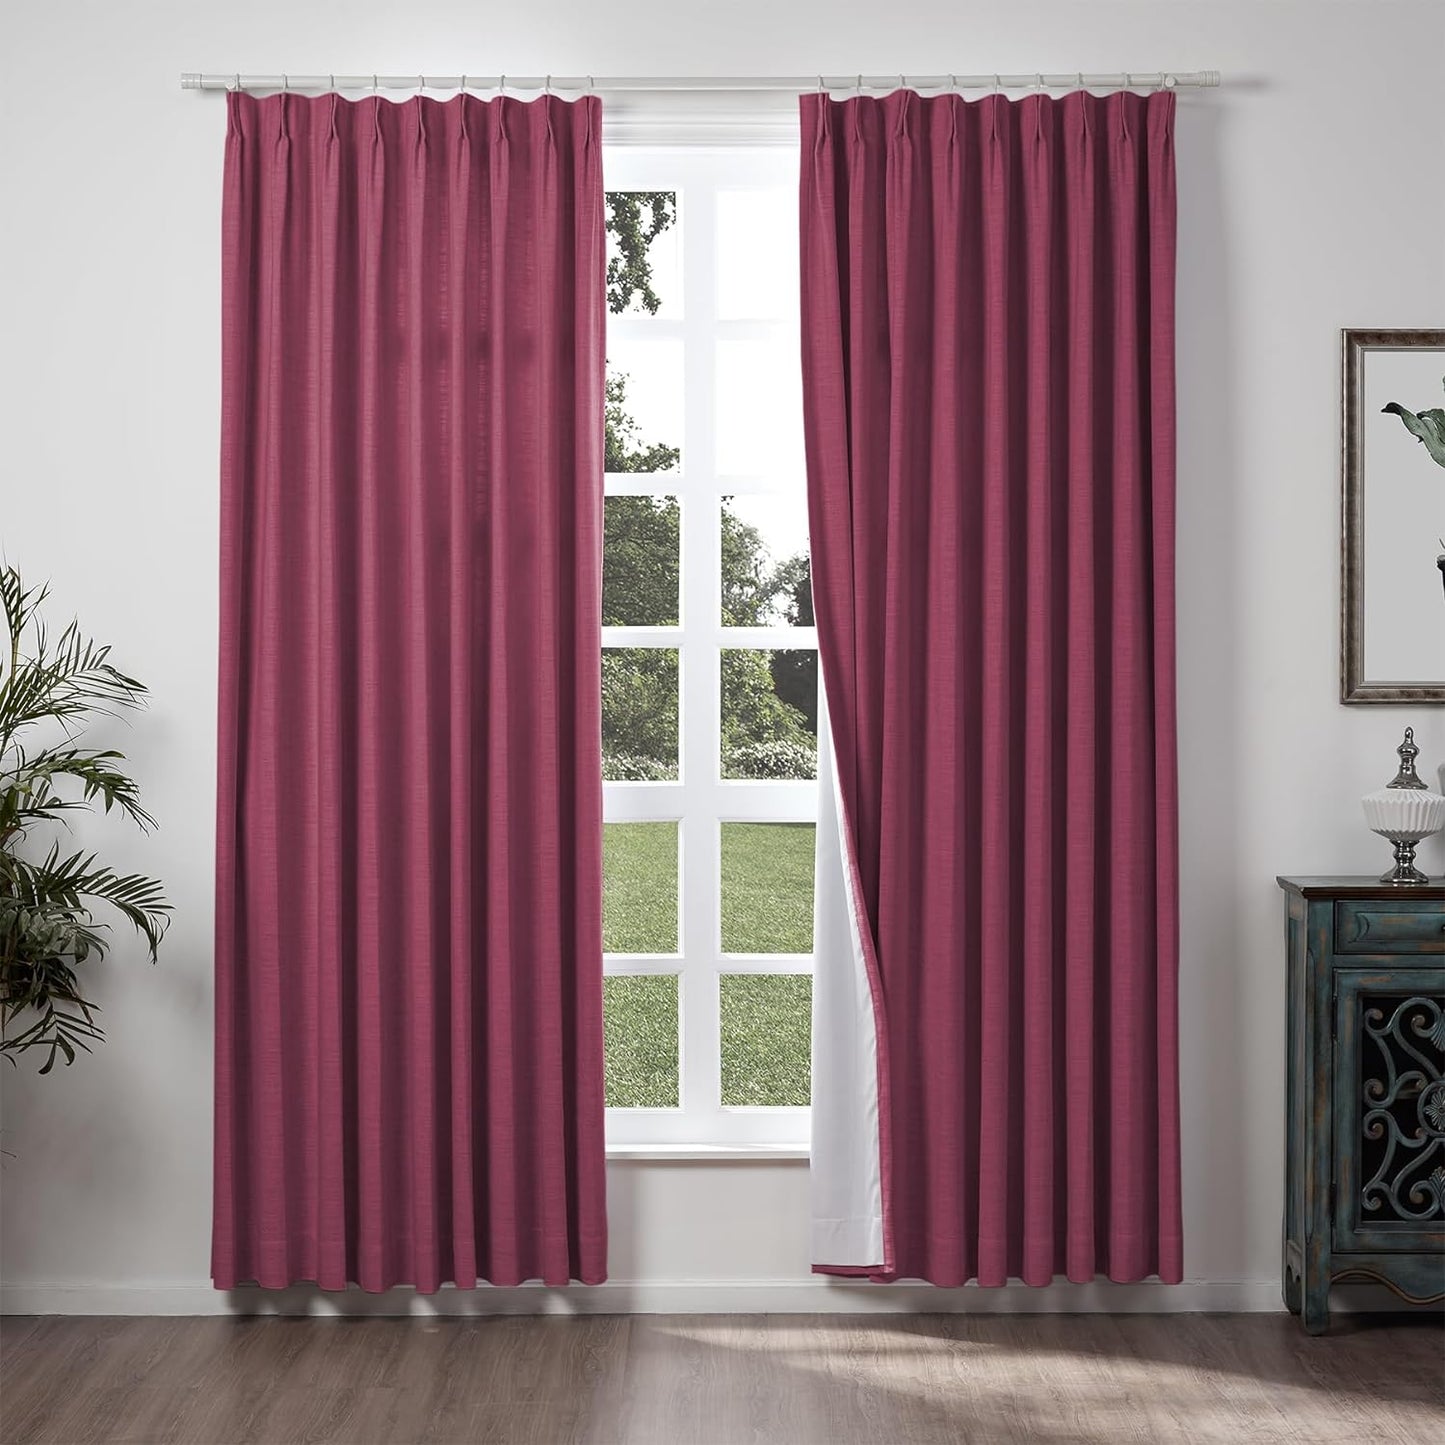 Chadmade 50" W X 63" L Polyester Linen Drape with Blackout Lining Pinch Pleat Curtain for Sliding Door Patio Door Living Room Bedroom, (1 Panel) Sand Beige Tallis Collection  ChadMade Burgundy Red (22) 100Wx84L 